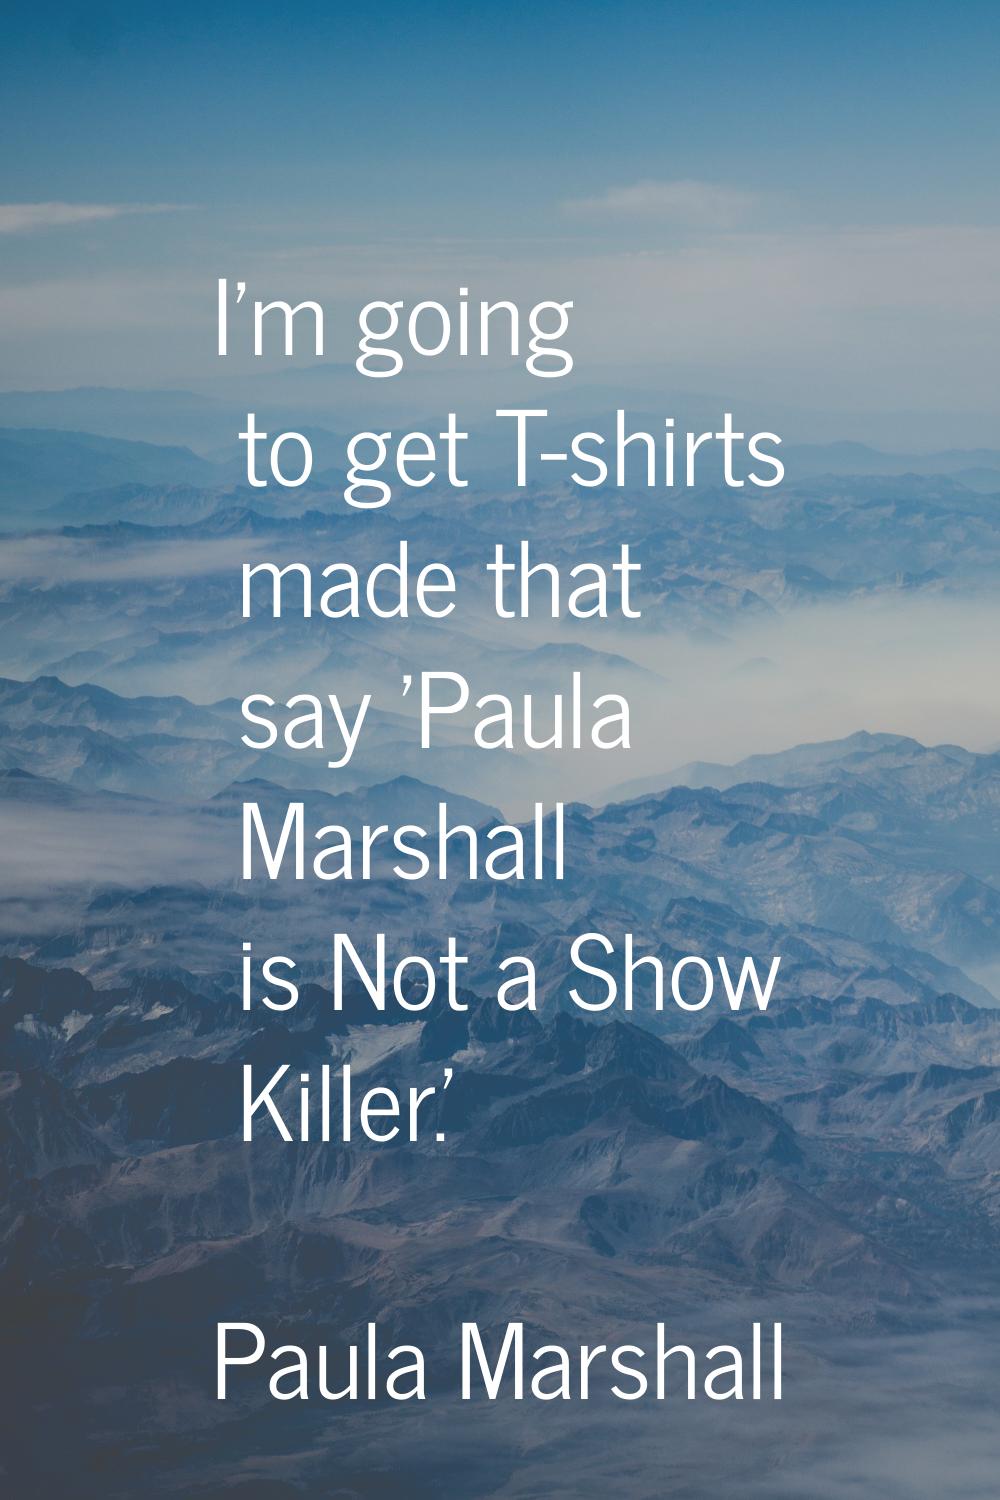 I'm going to get T-shirts made that say 'Paula Marshall is Not a Show Killer.'